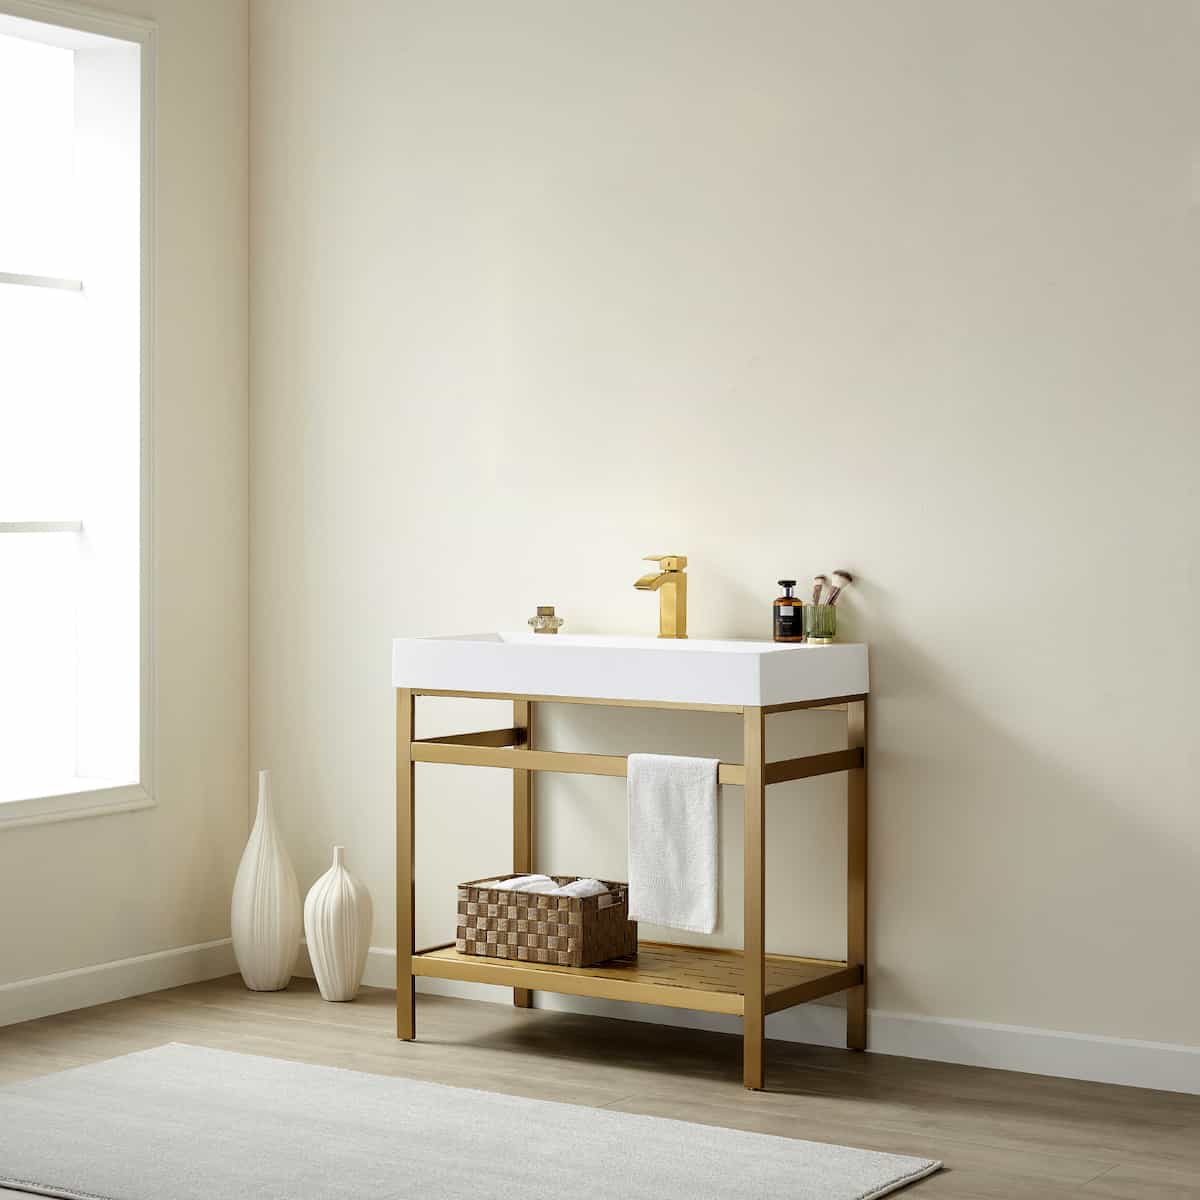 Vinnova Soria 36 Inch Freestanding Single Sink Bath Vanity in Brushed Gold Metal Support with White One-Piece Composite Stone Sink Top Without Mirror Right Side 702636-BG-WH-NM #mirror_without mirror